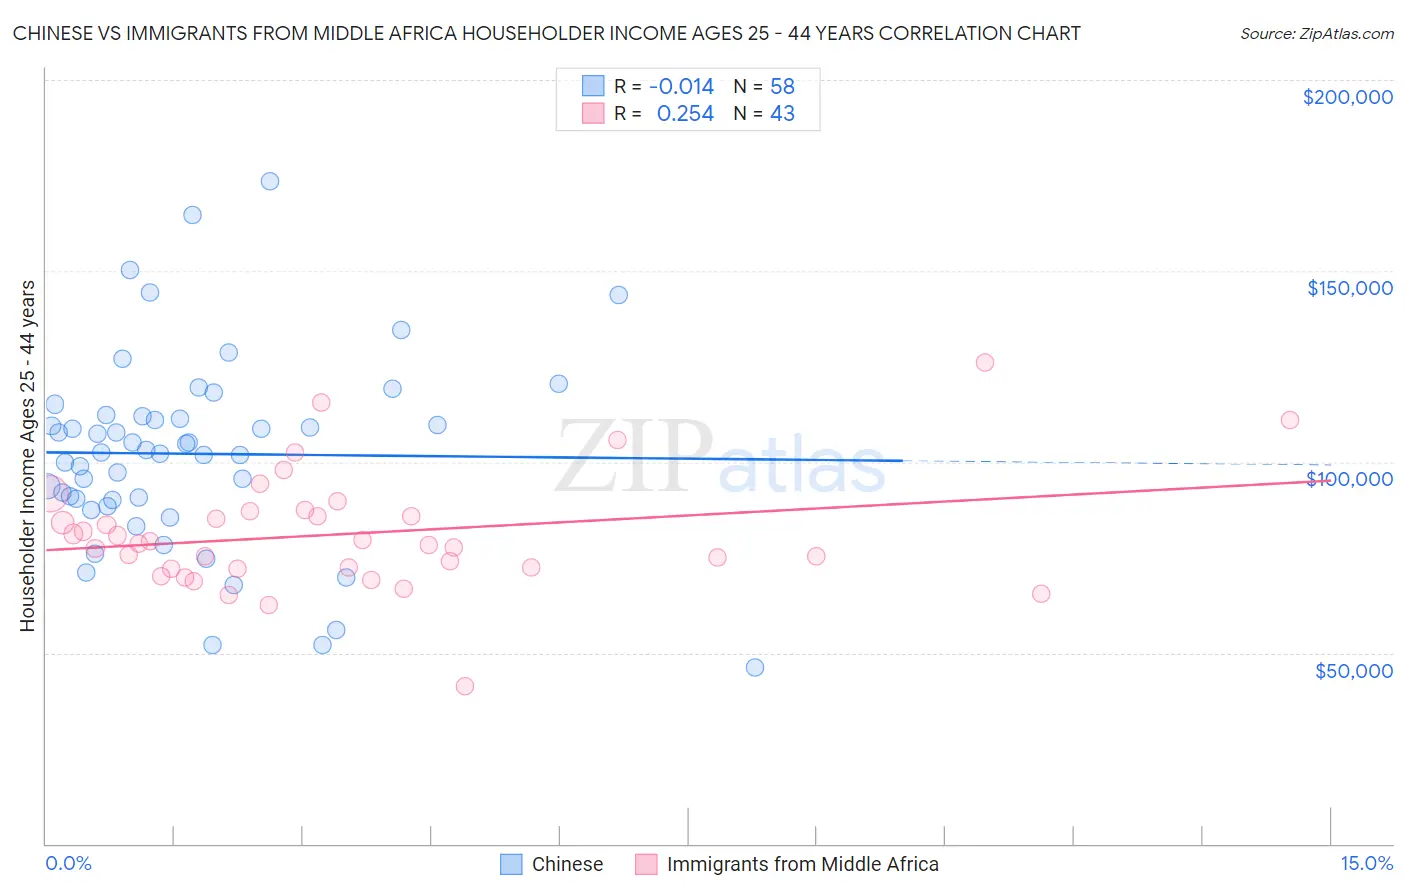 Chinese vs Immigrants from Middle Africa Householder Income Ages 25 - 44 years